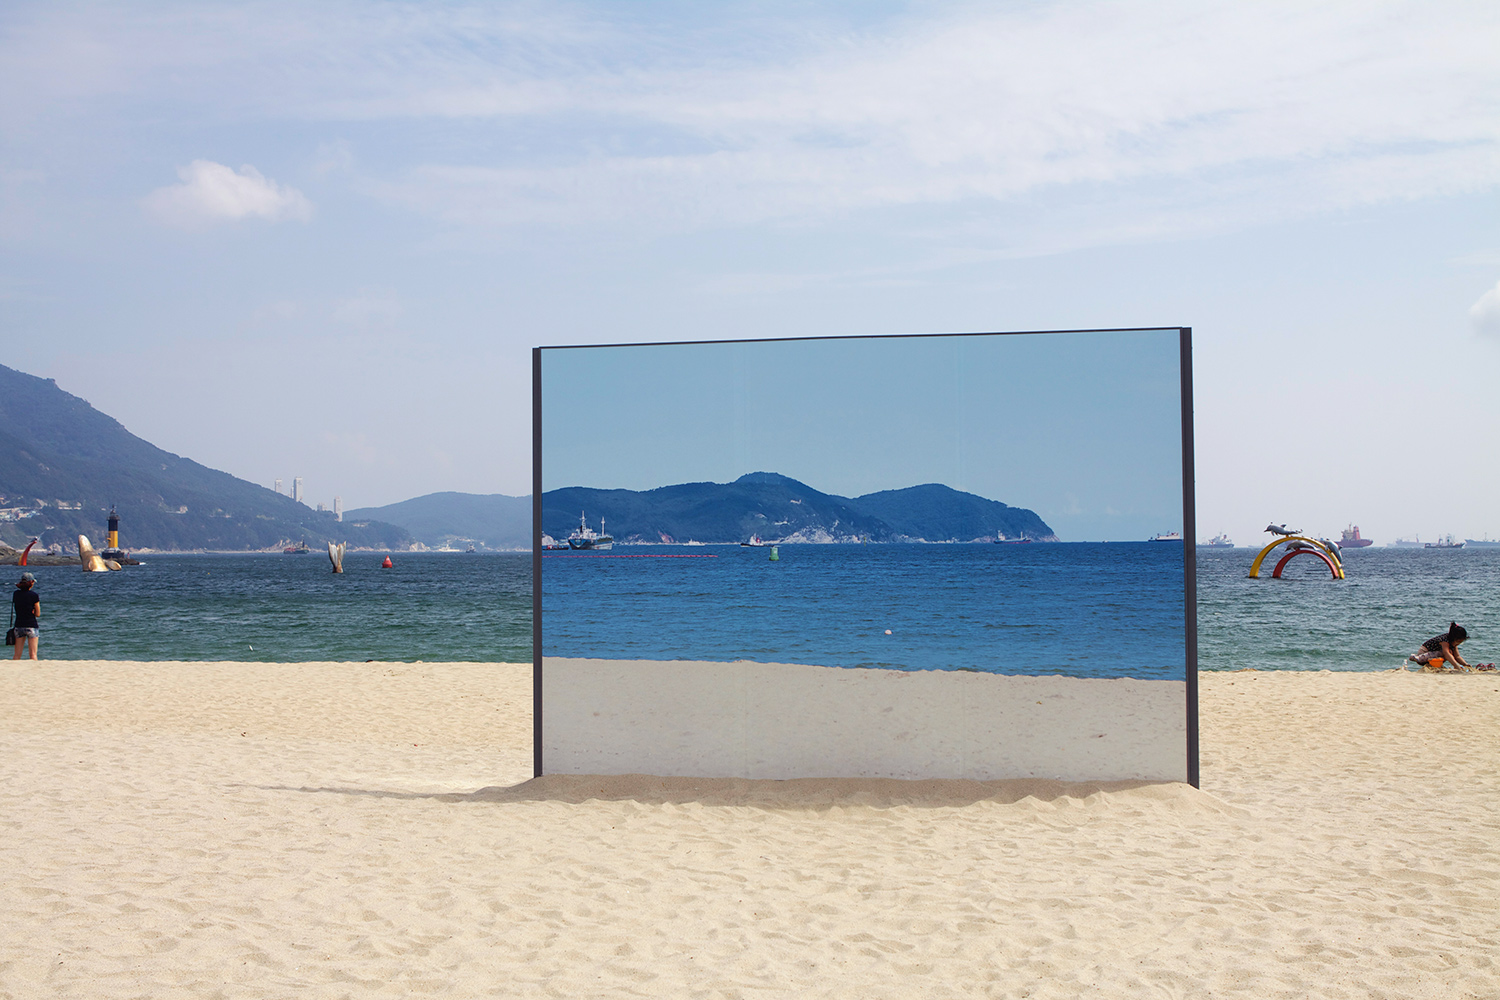   You Are Here , 2013 (image side)&nbsp;Steel, Acrylic, Vinyl Print, 8'x 12'  This was a public art installation created in collaboration with Che Yeon Park. The piece was part of the Sea Art Festival Busan Biennale in Busan, South Korea. It is an ex